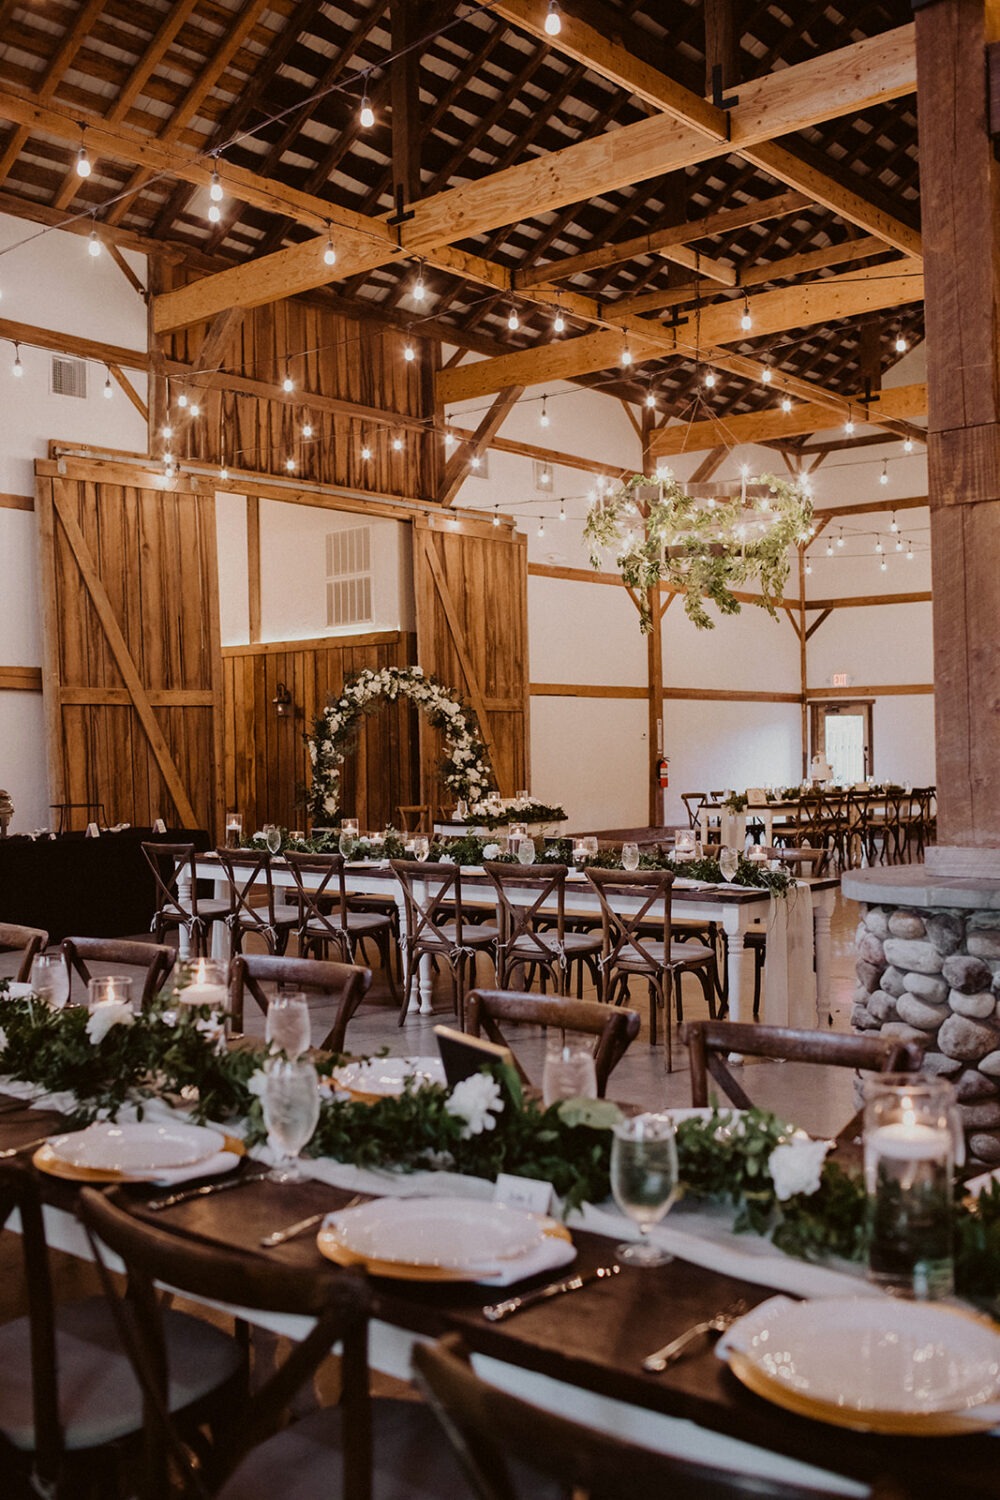 gold and white table setting decor at barn wedding